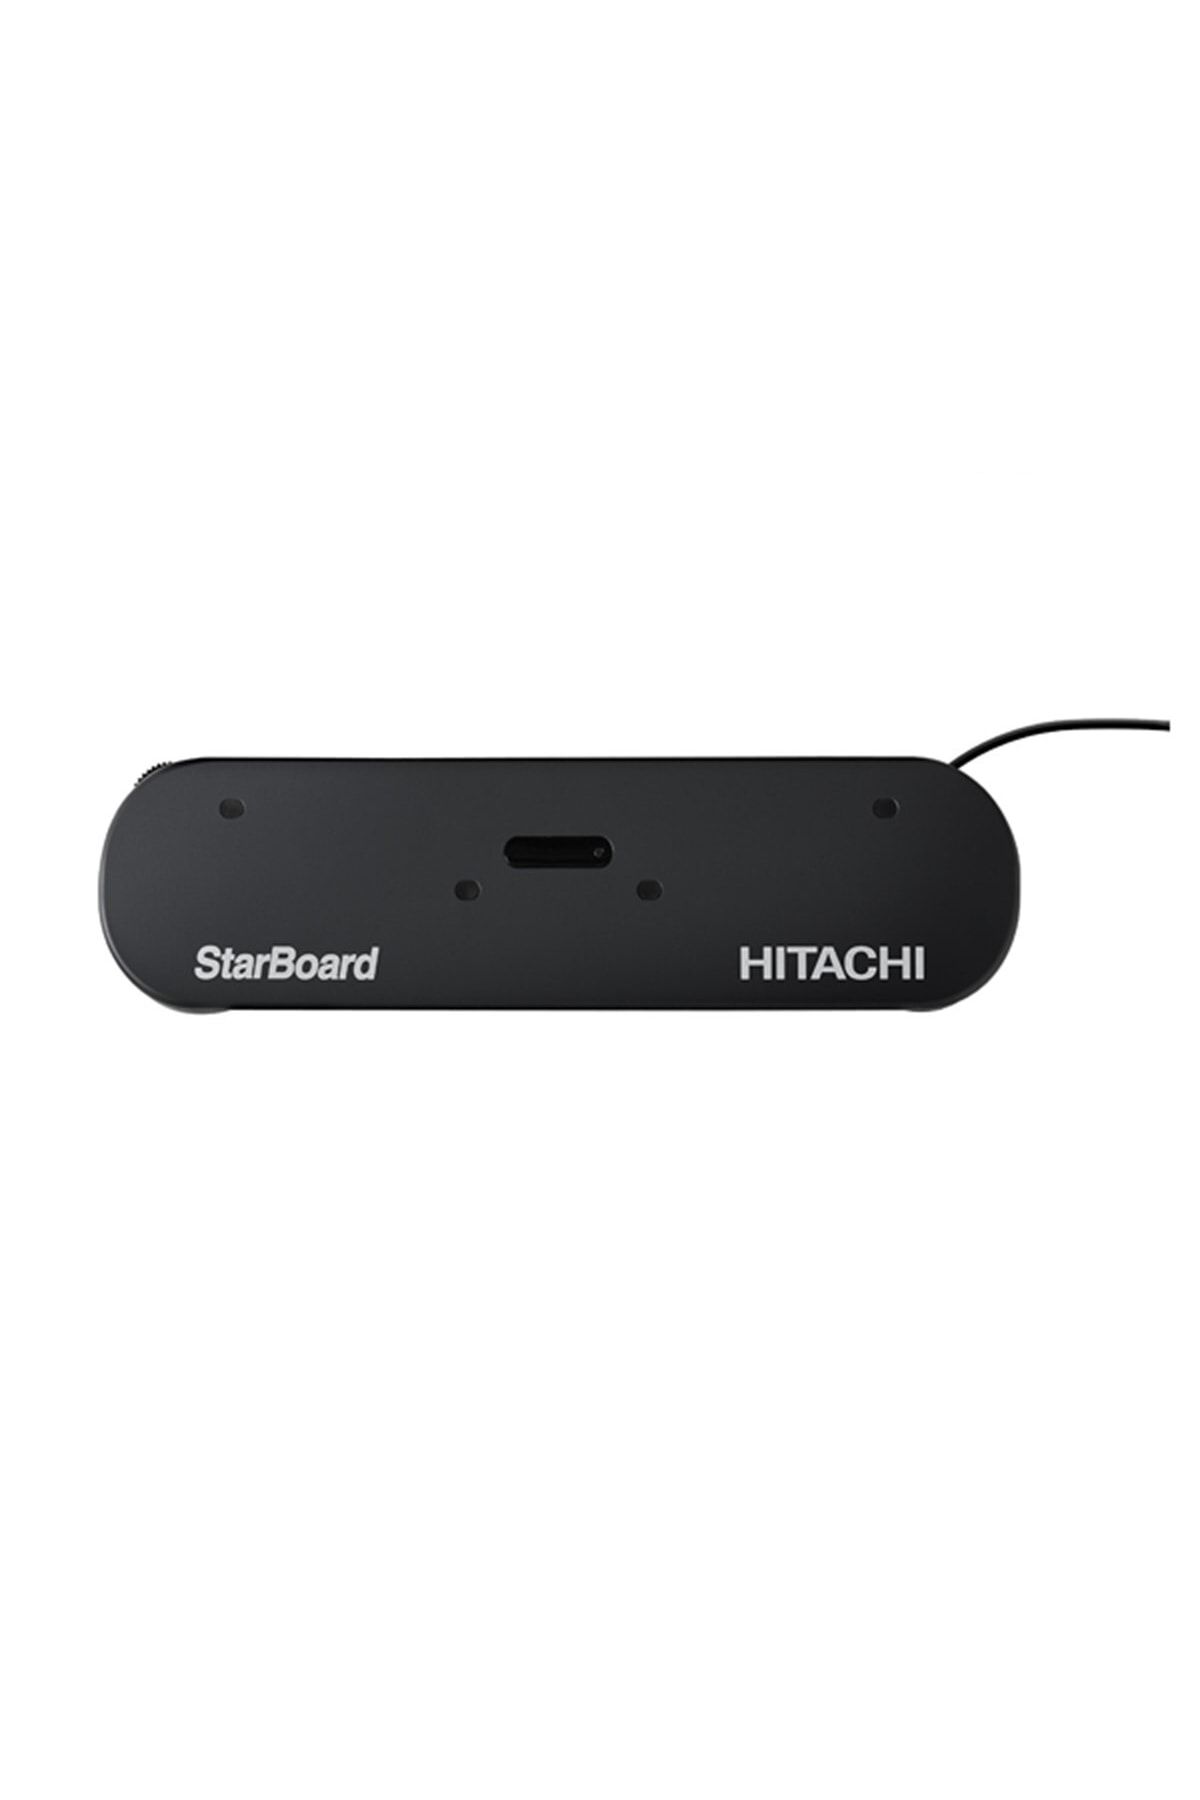 Hitachi Starboard Solutions